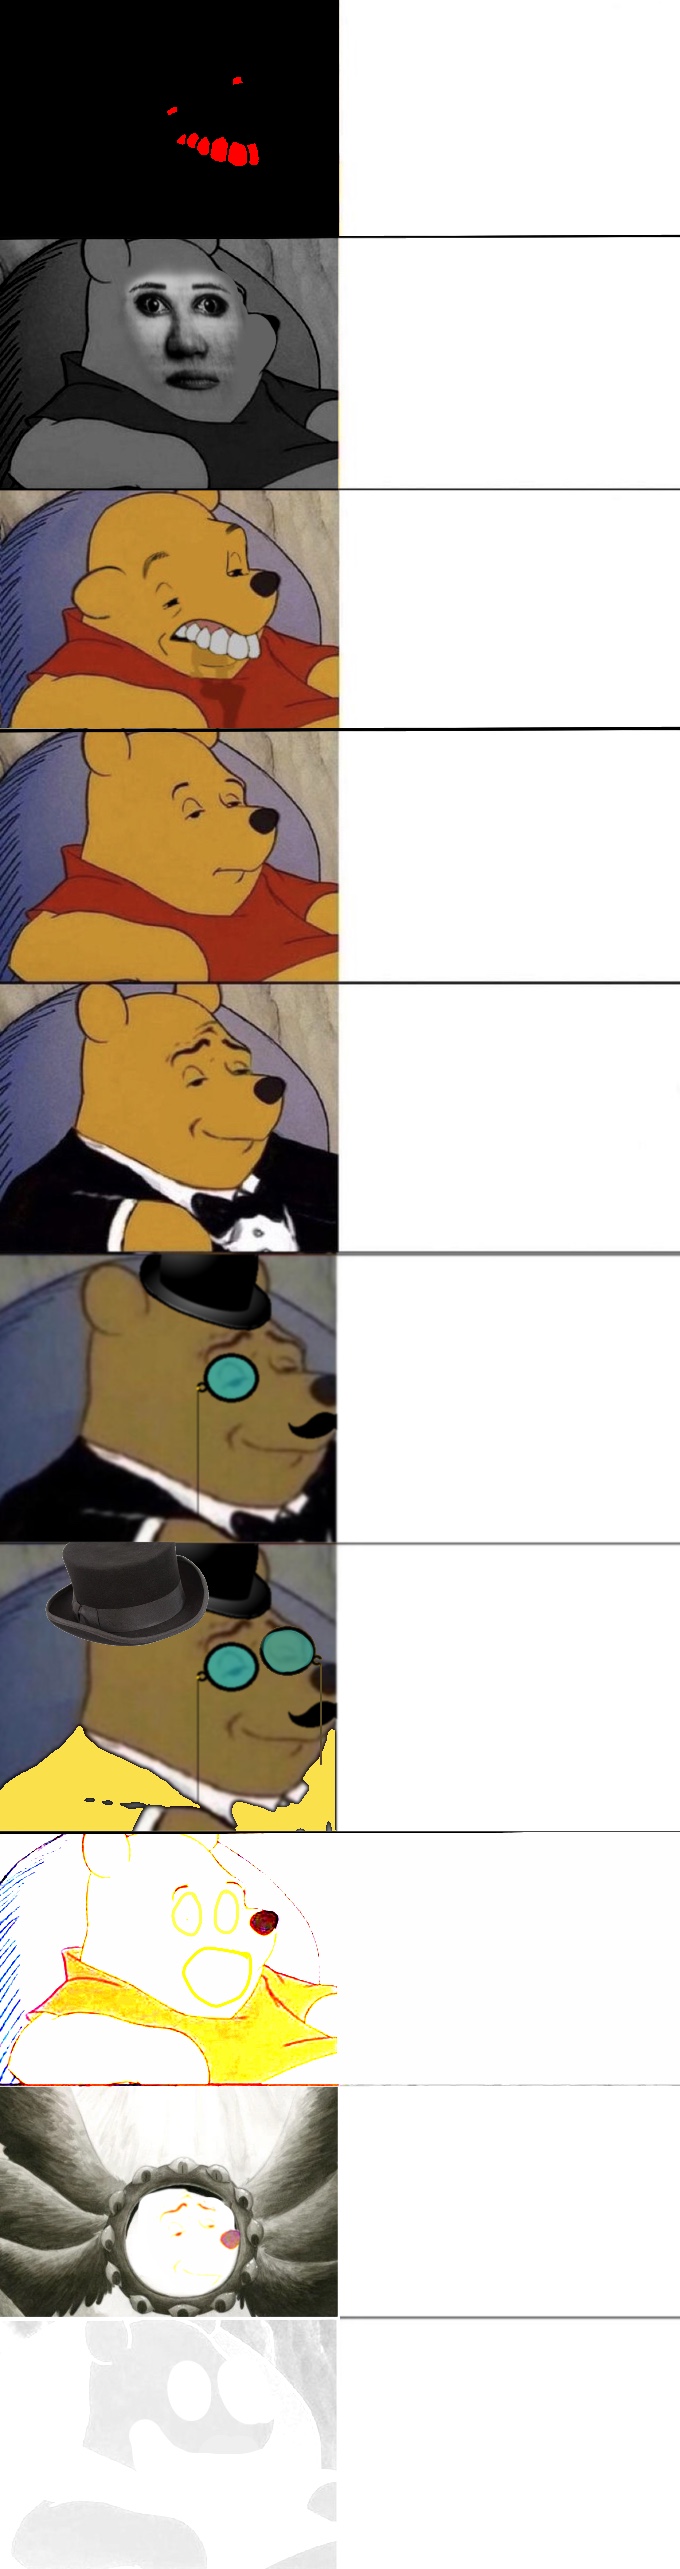 Whinny the pooh meme extended Blank Meme Template